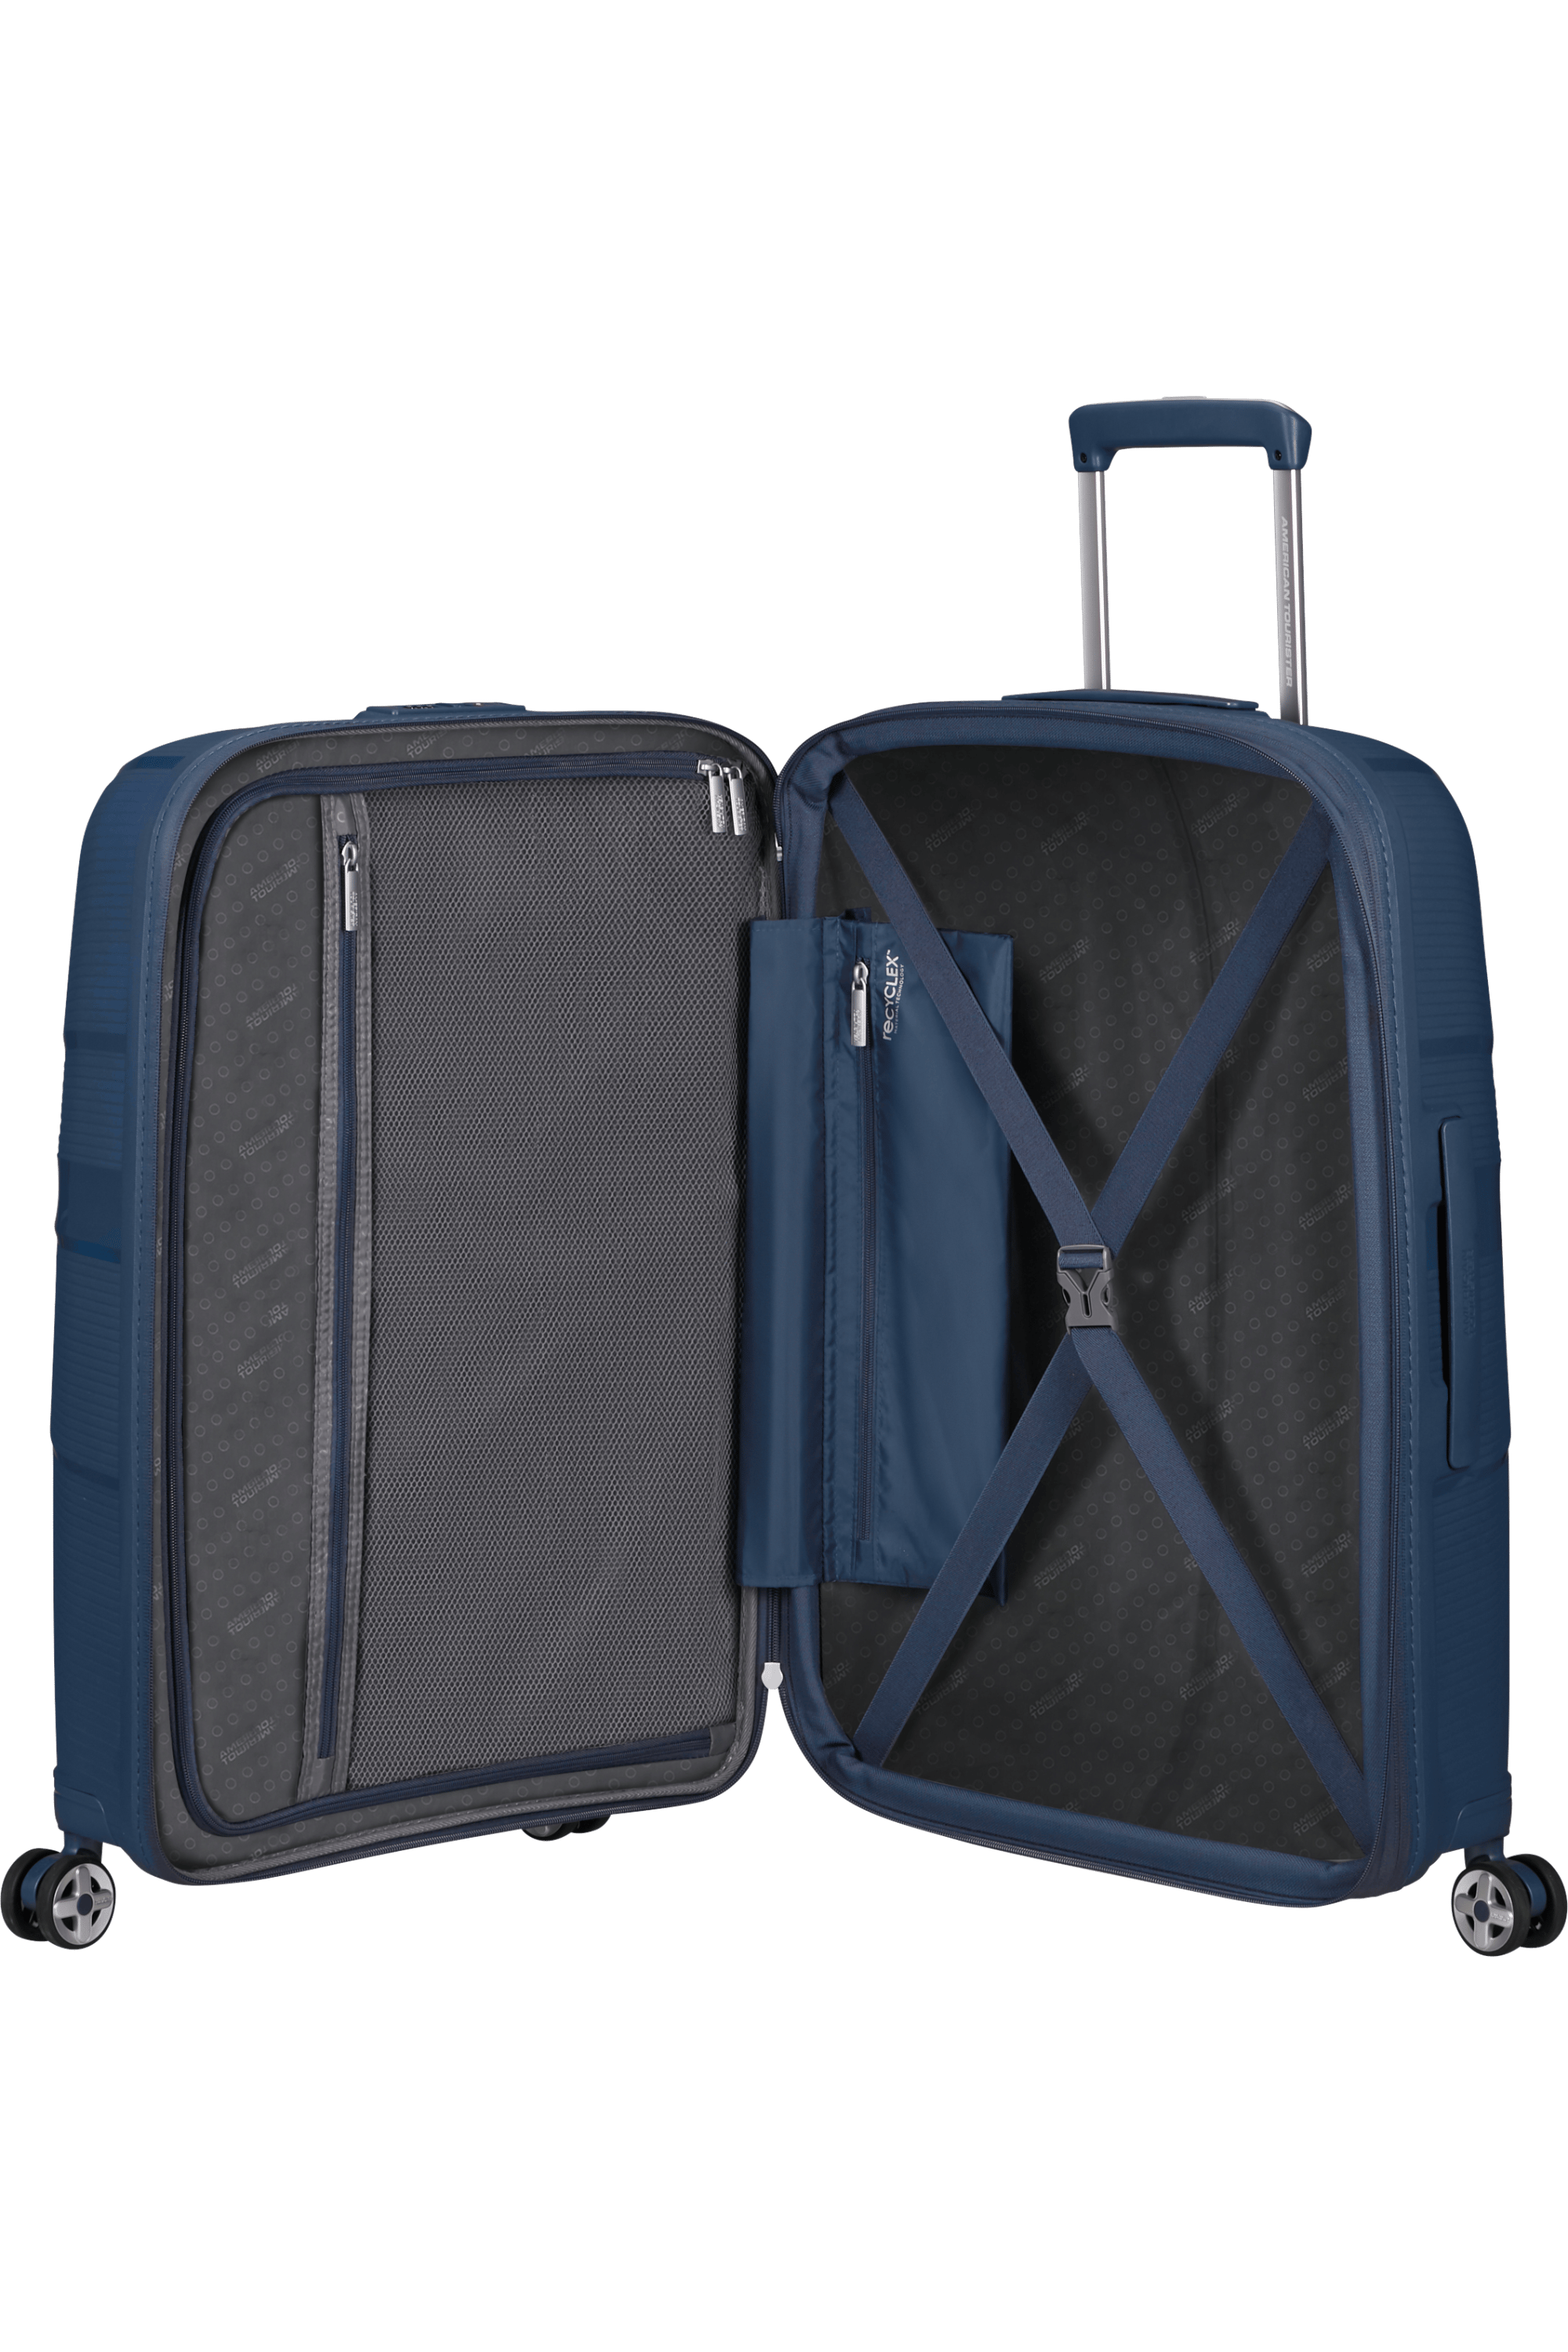 American Tourister StarVibe Trolley M navy